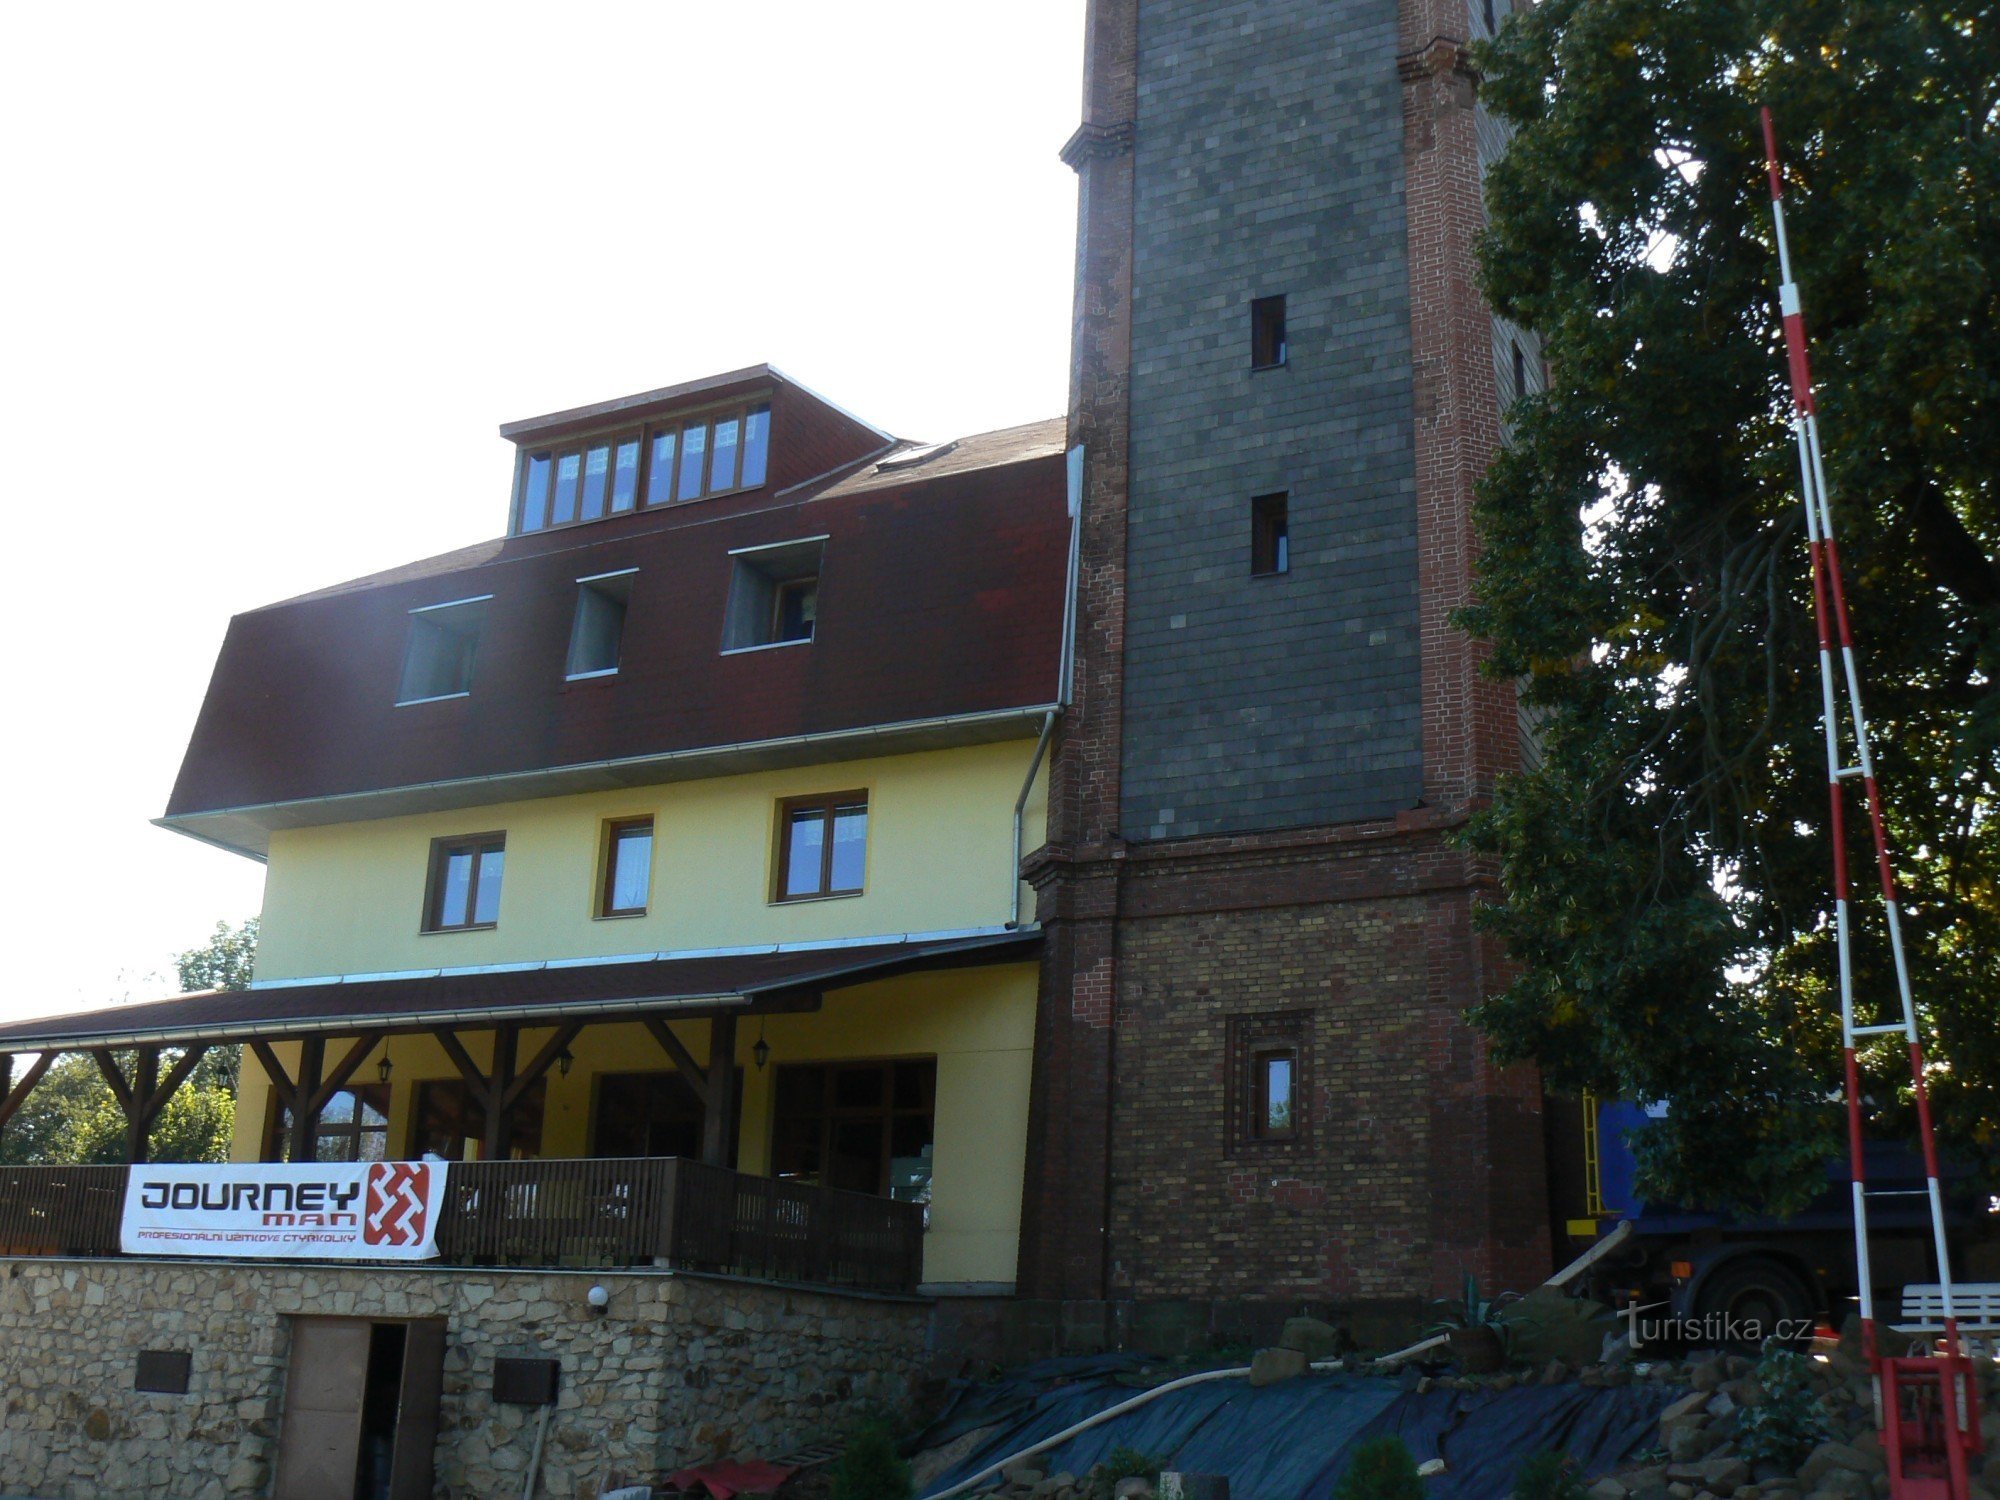 Restaurant and observation tower Tábor